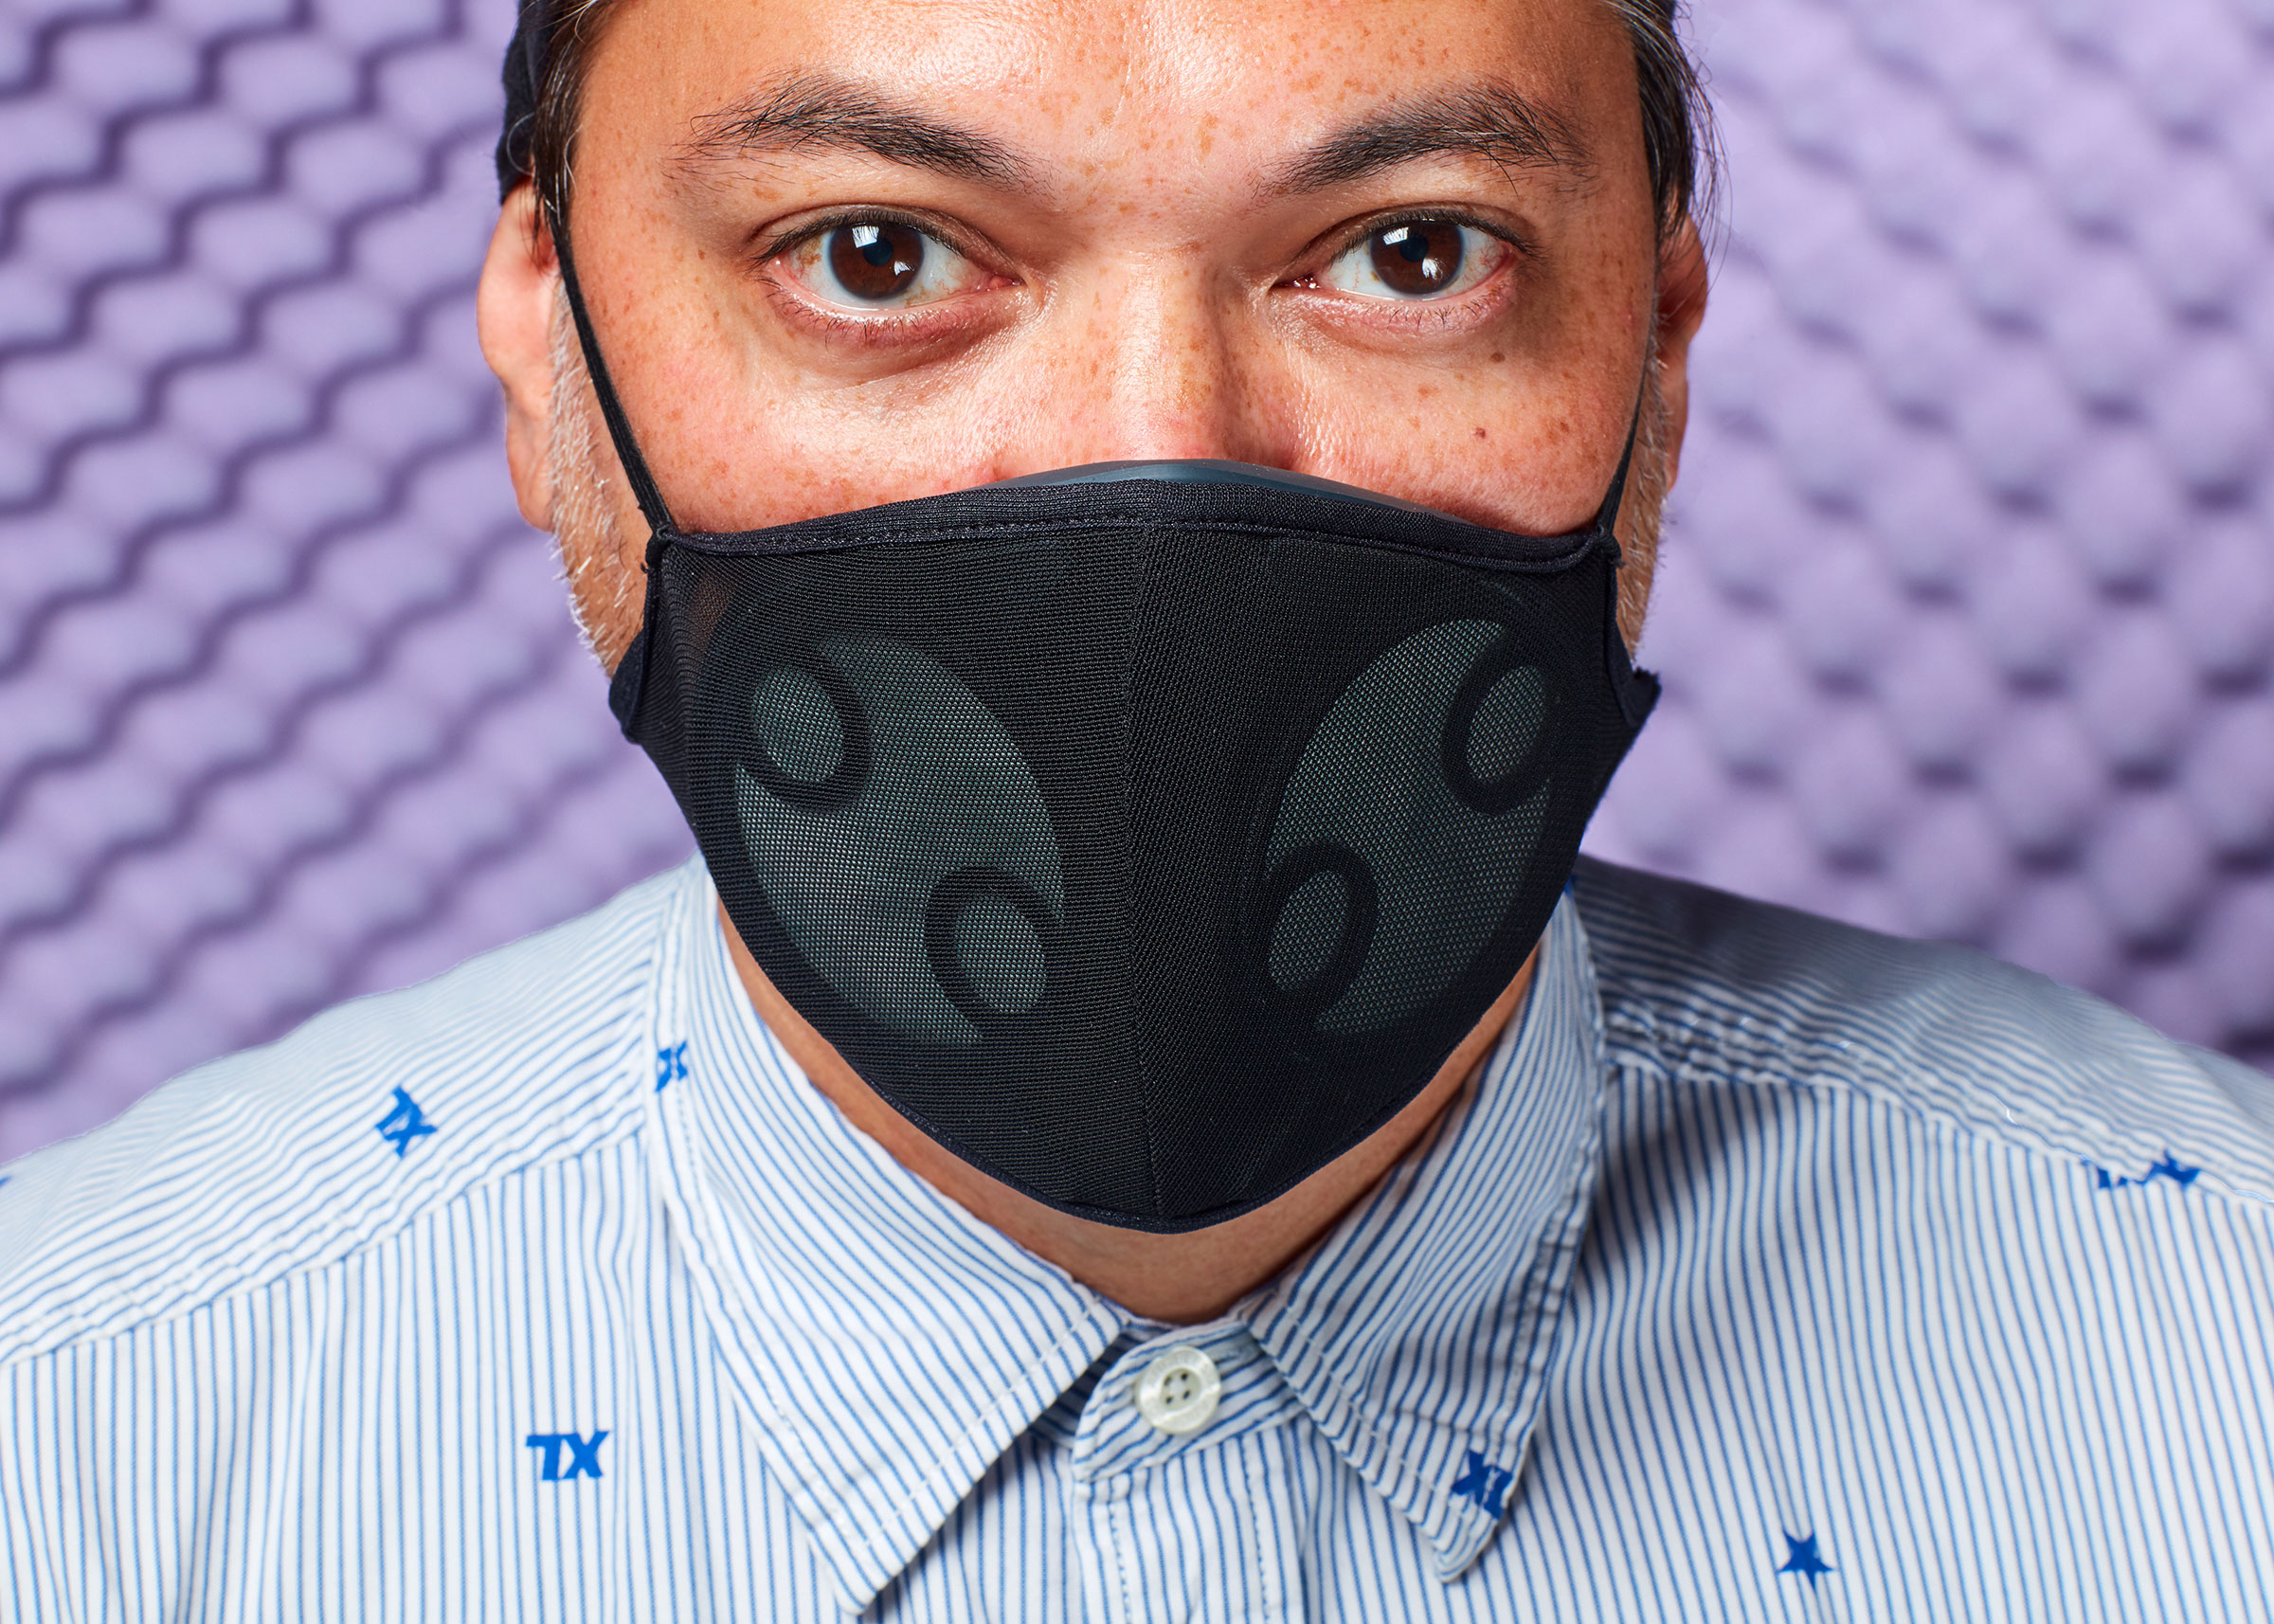 Best Inventions 2020: B2 Mask